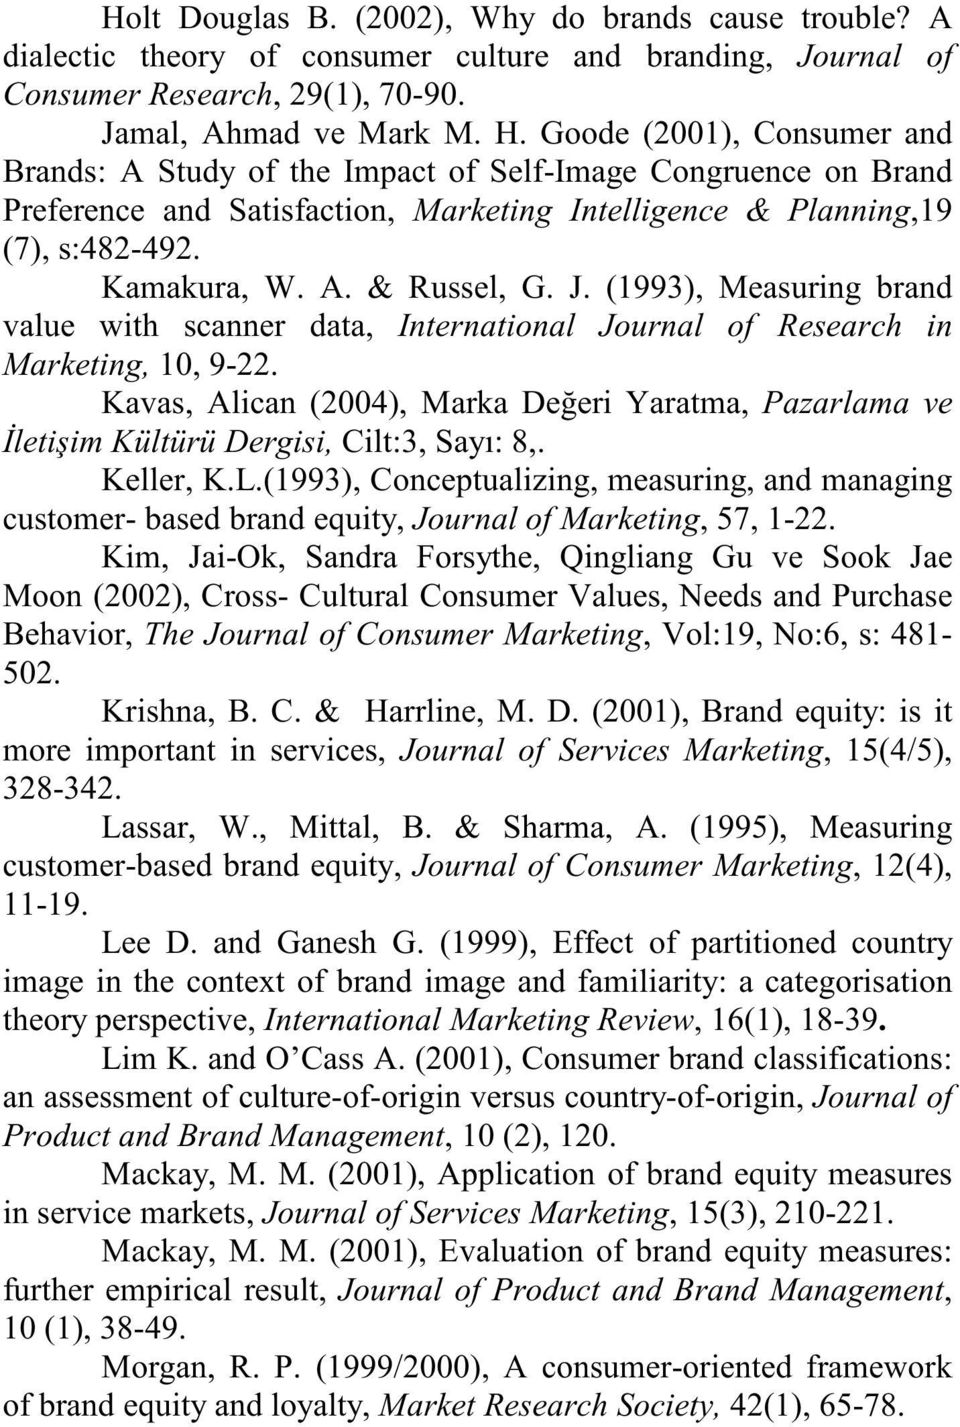 J. (1993), Measuring brand value with scanner data, International Journal of Research in Marketing, 10, 9-22.